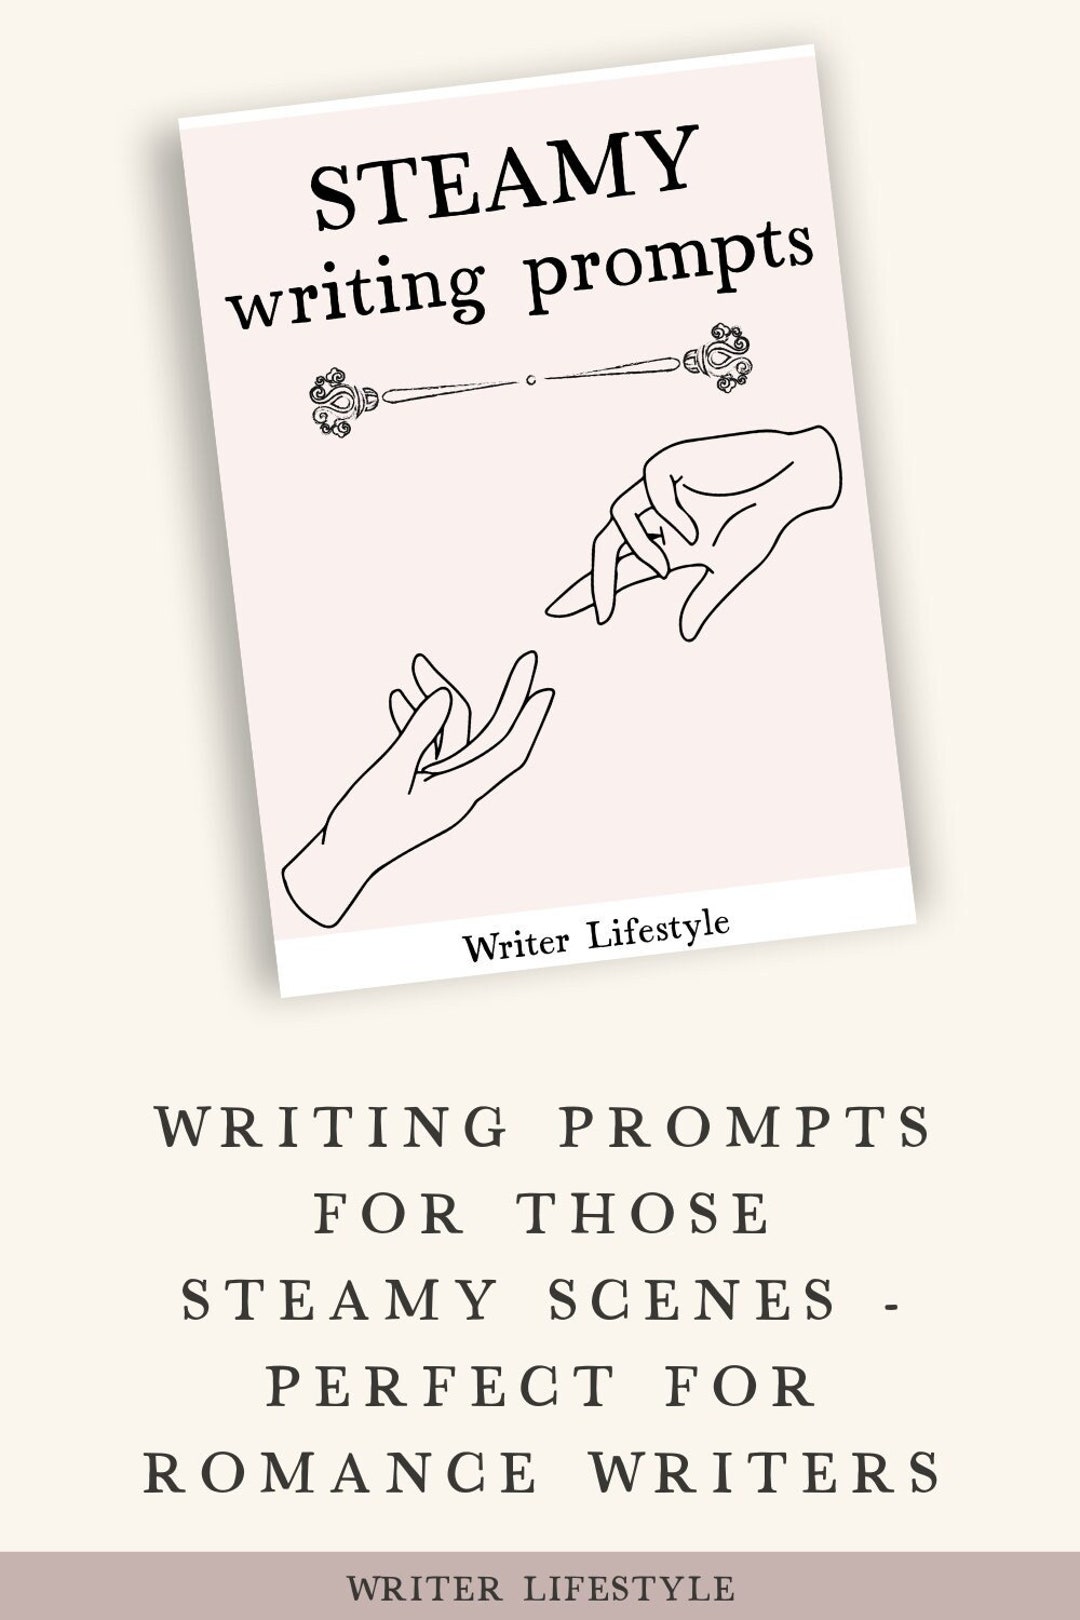 340 Romance Writing Prompts That Will Sweep Your Readers off Their Feet